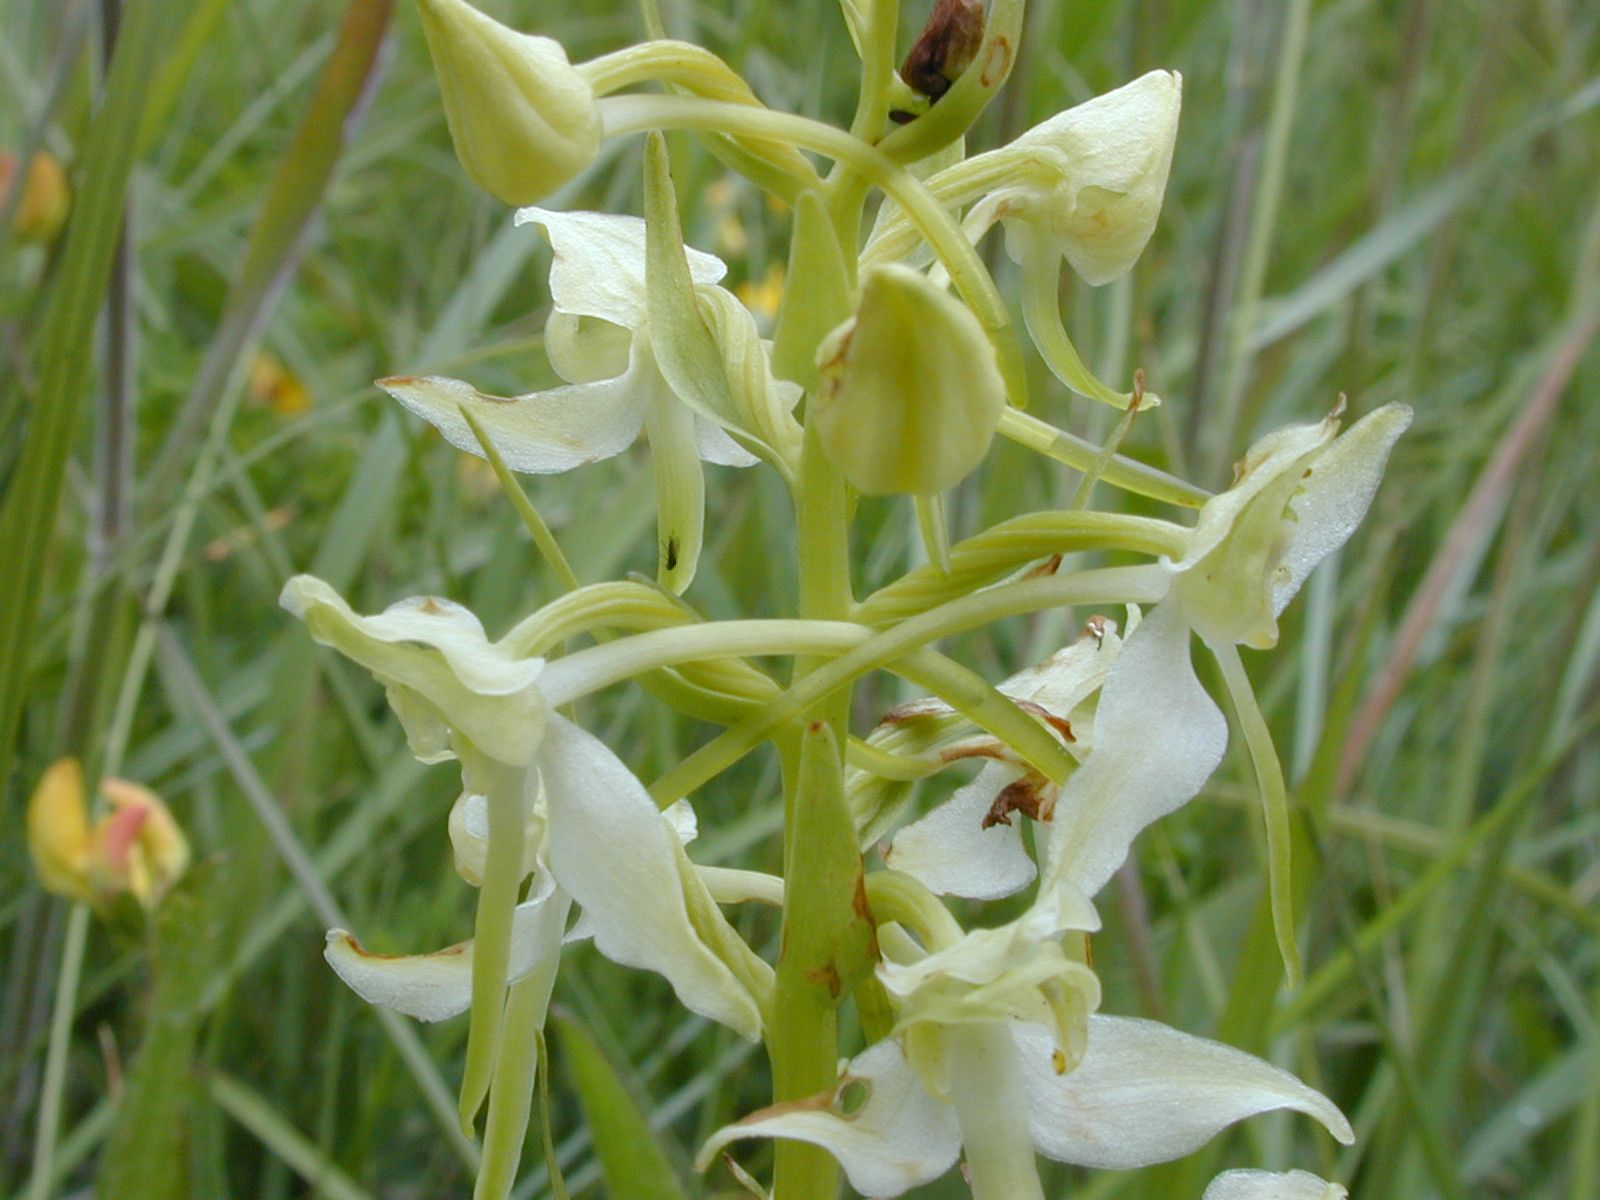 Greater Butterfly Orchid.jpg